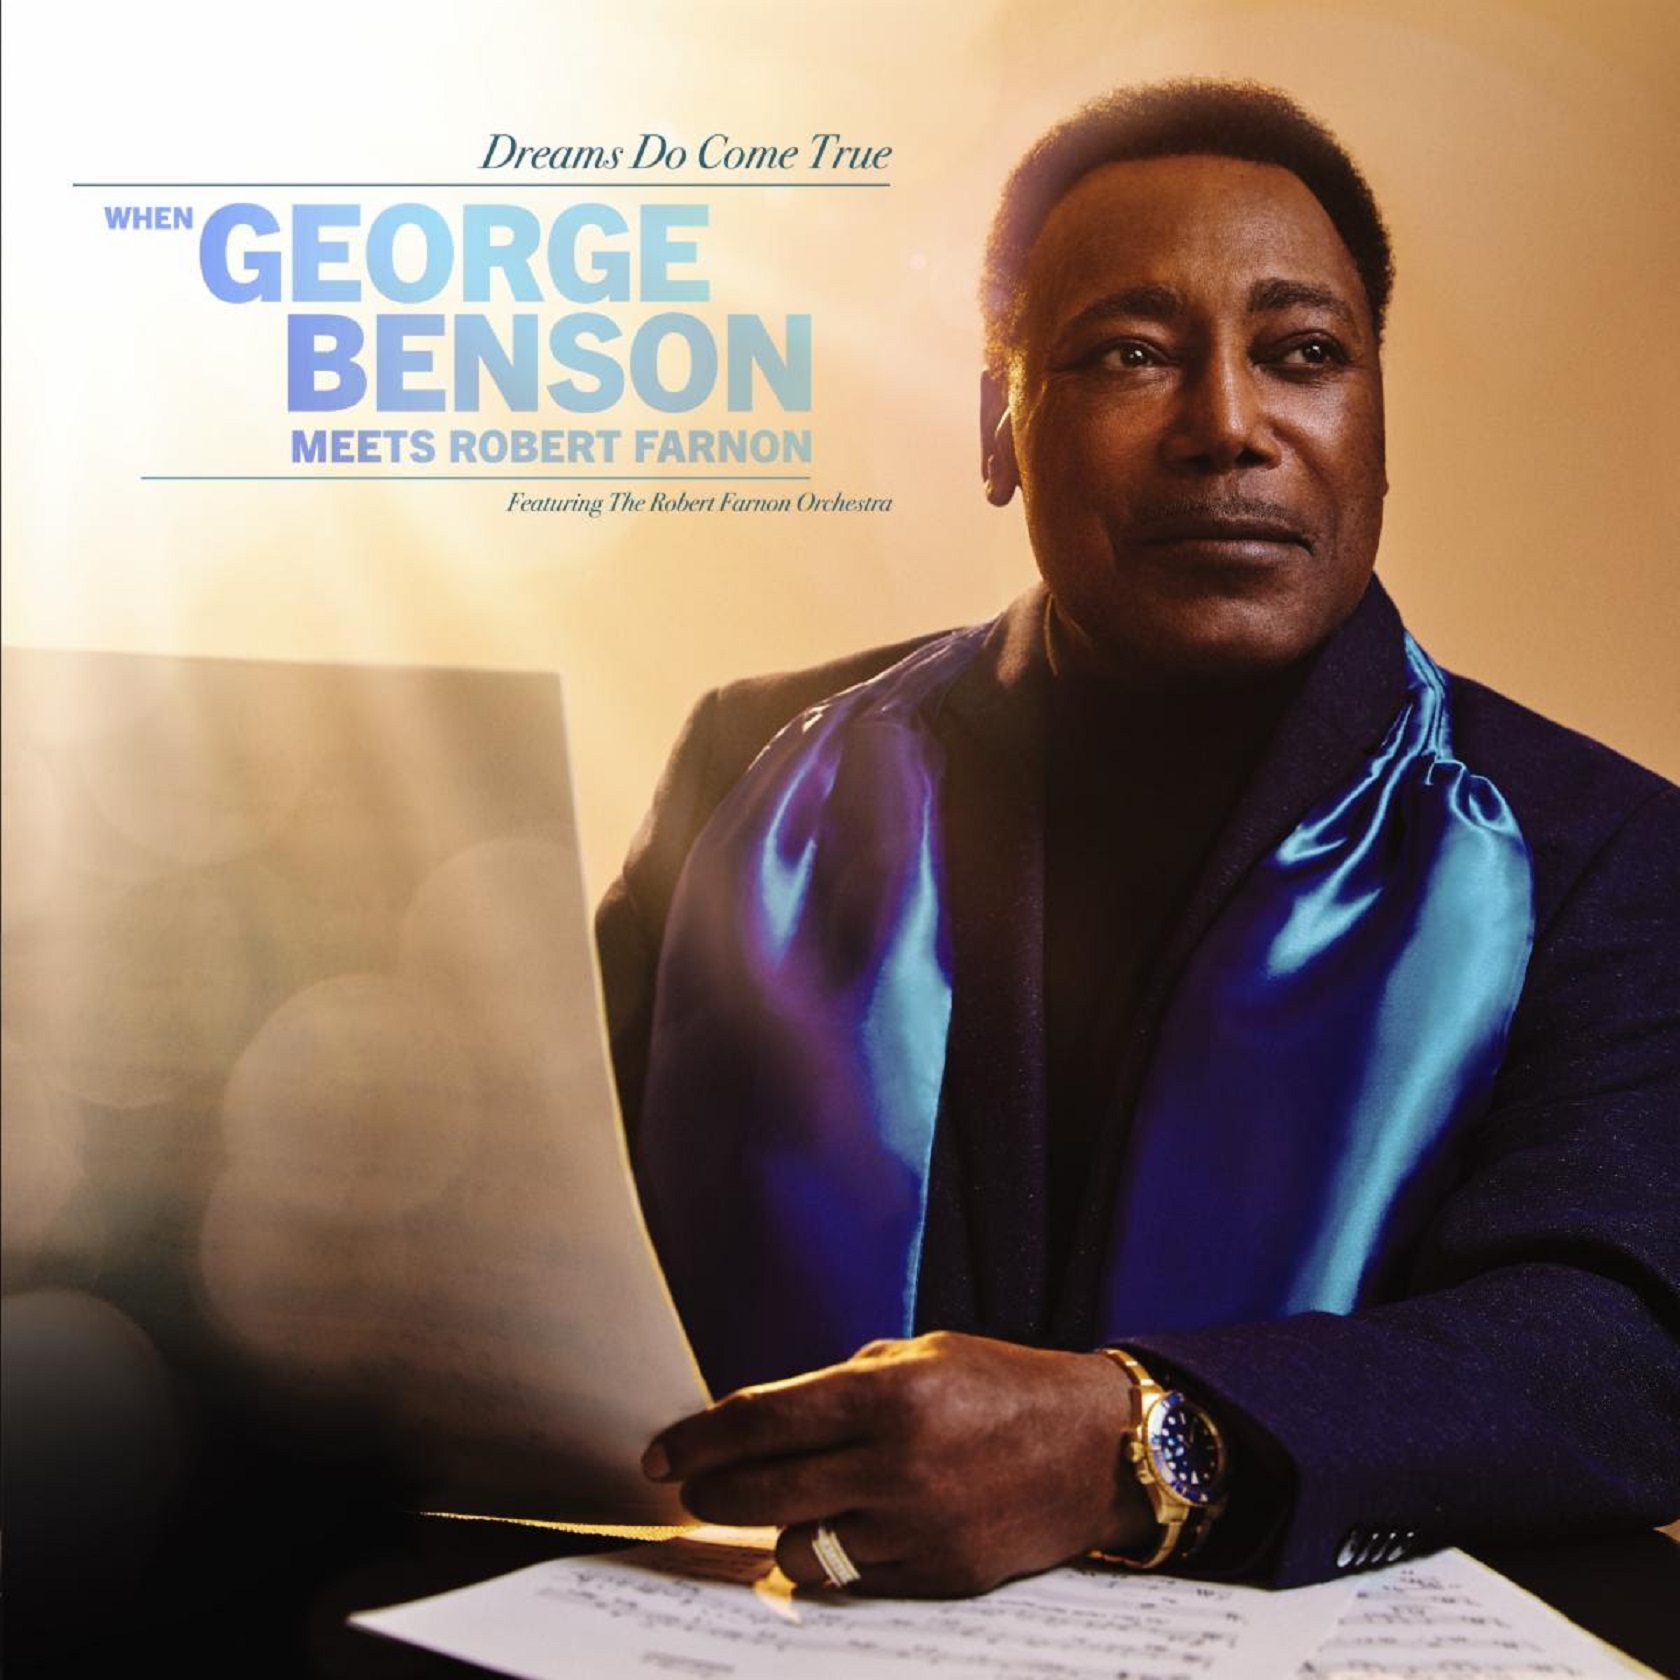 George Benson's once-lost orchestral album out now via Rhino / WMG